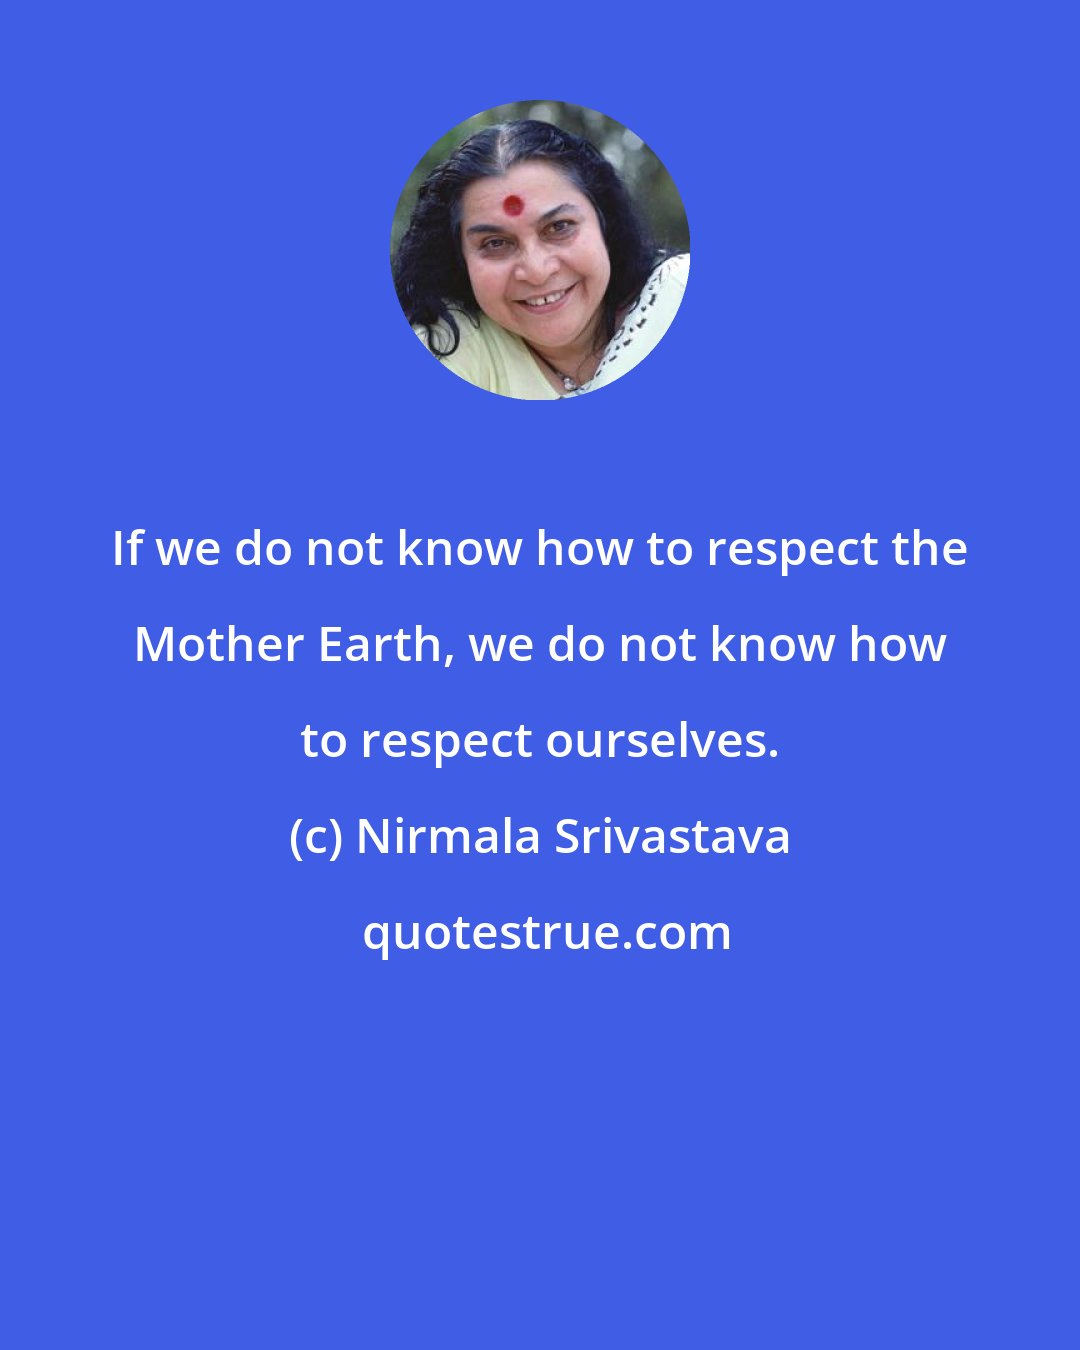 Nirmala Srivastava: If we do not know how to respect the Mother Earth, we do not know how to respect ourselves.